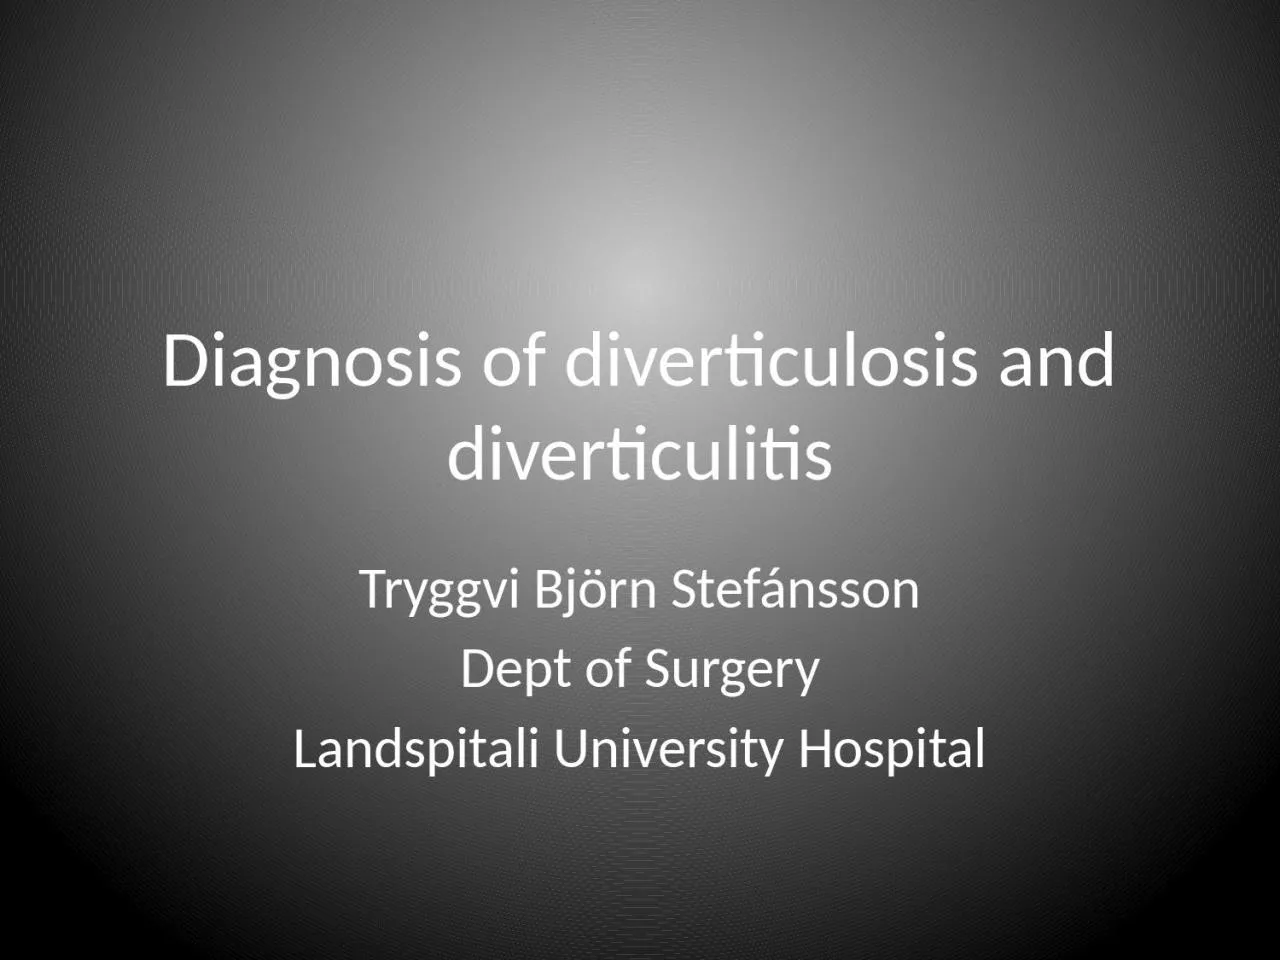 Diagnosis of diverticulosis and diverticulitis